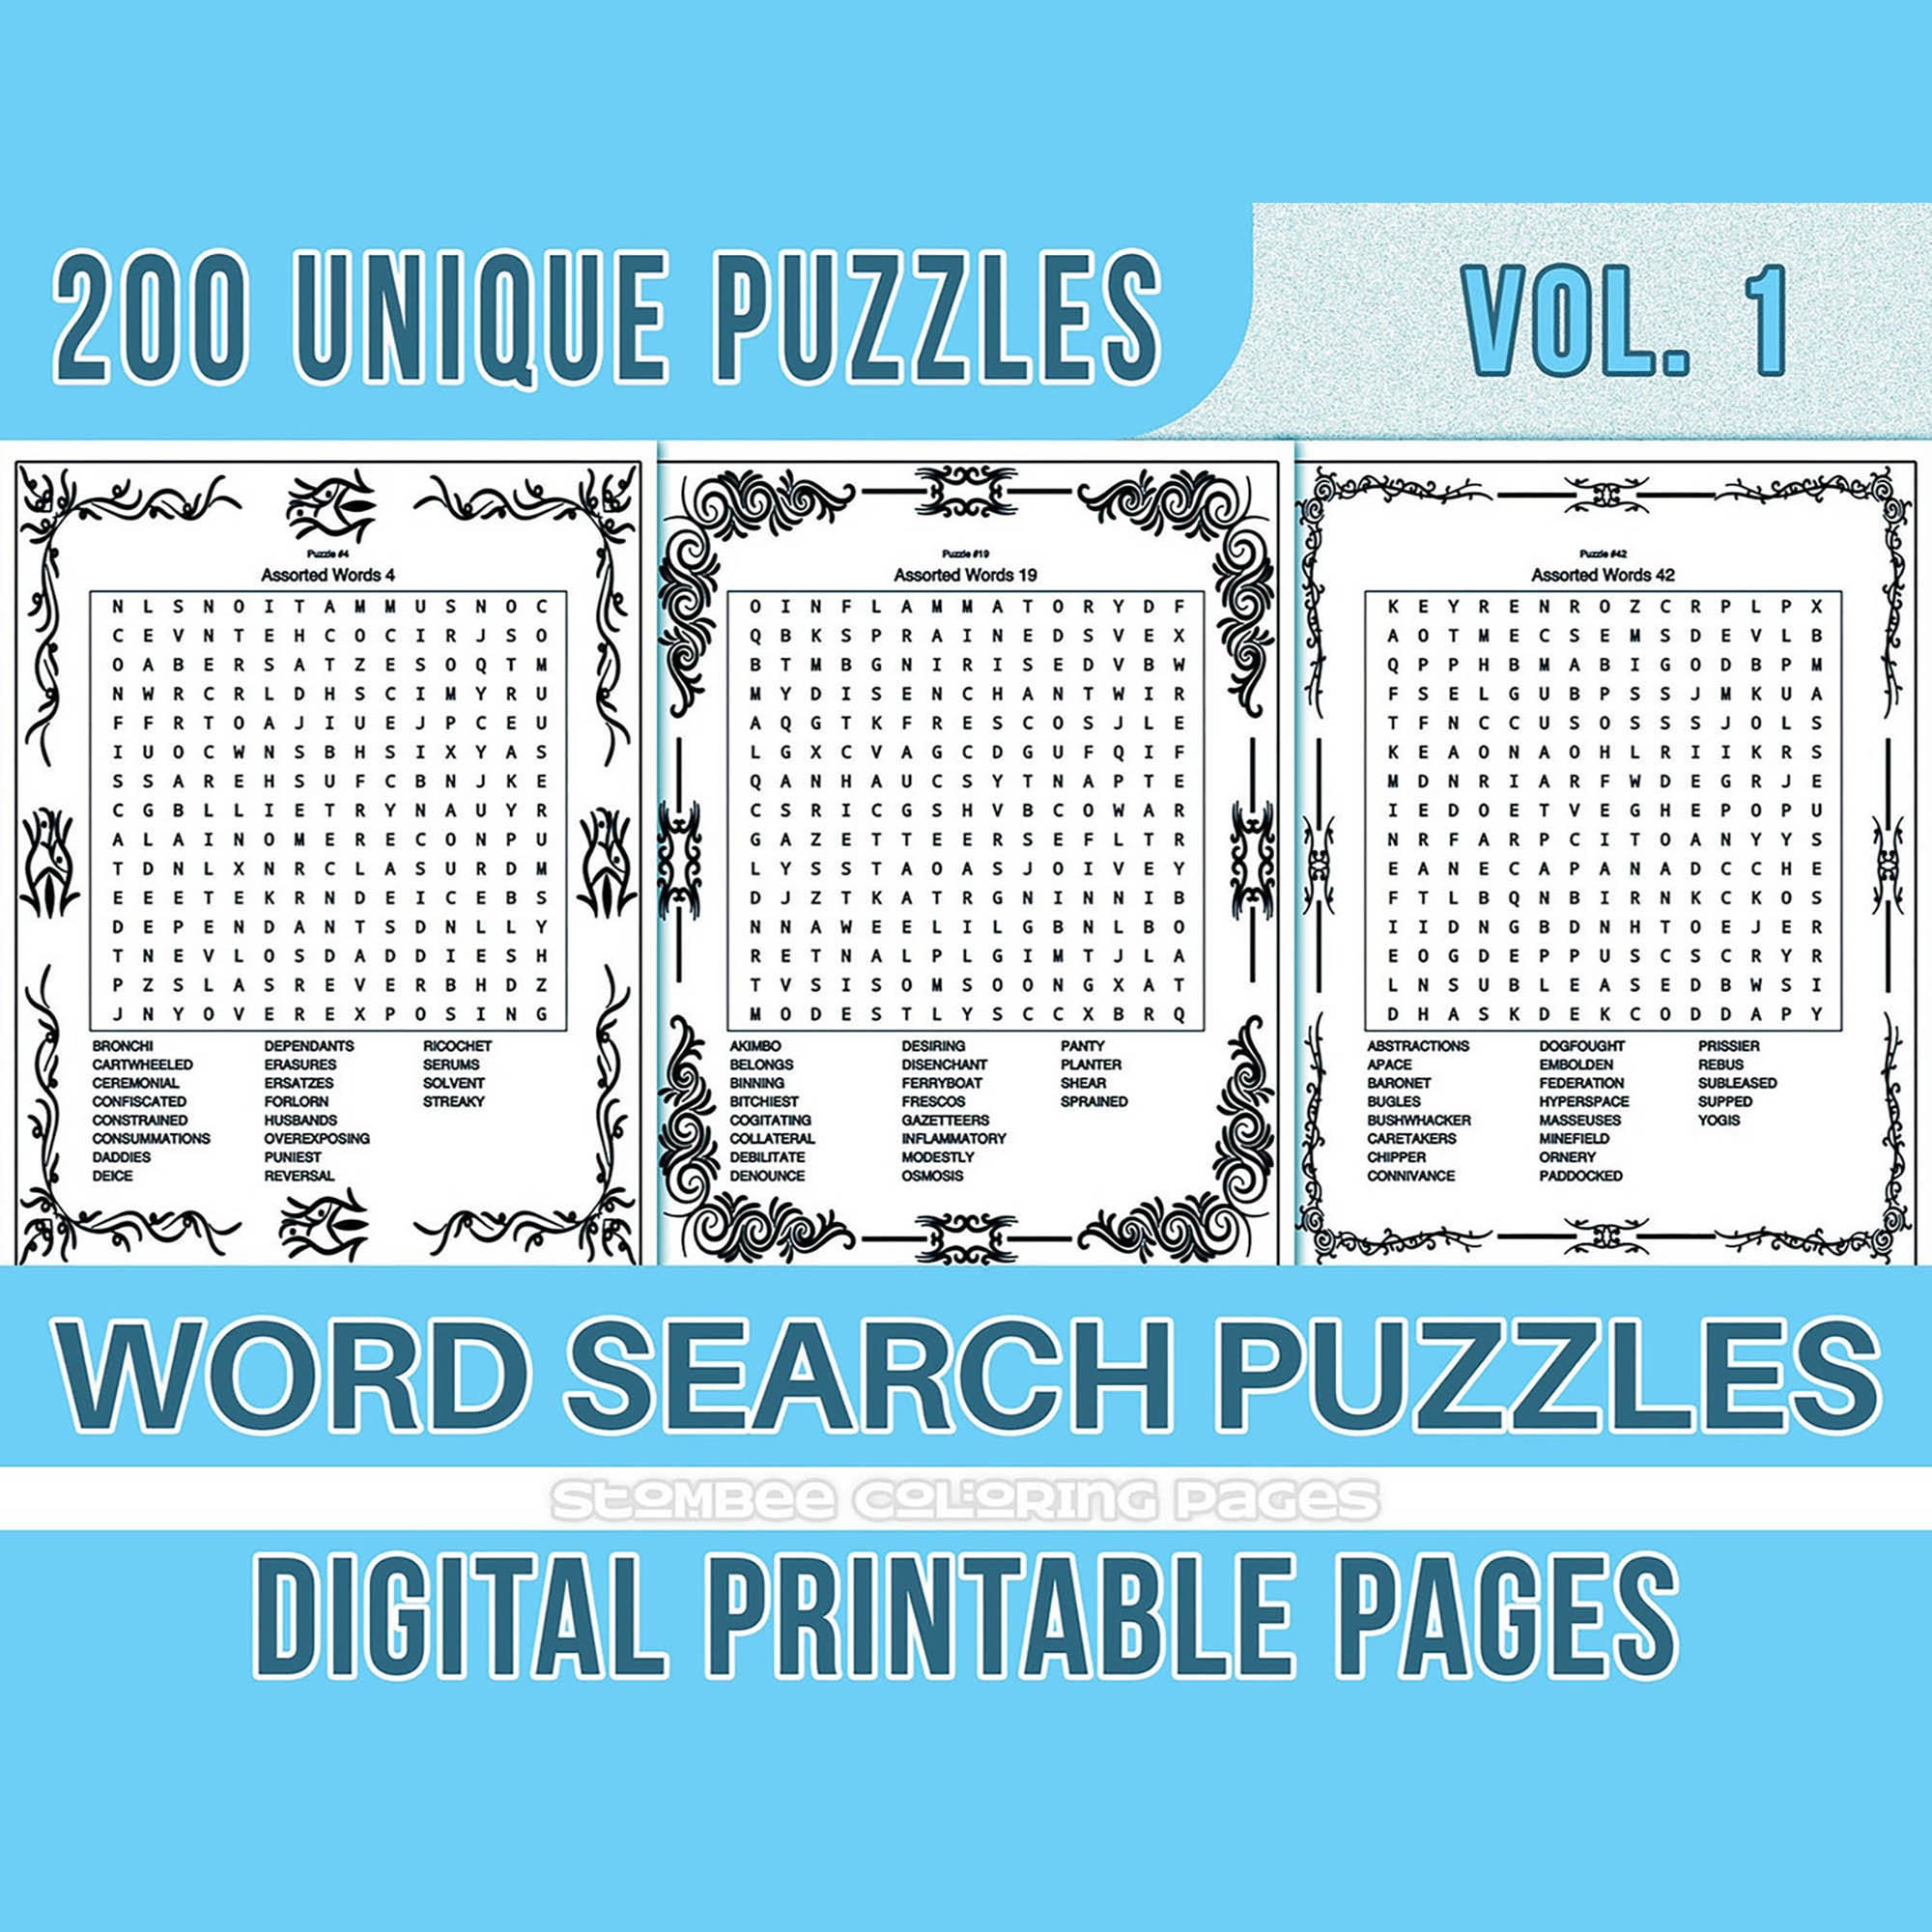 100 Taylor Swift Puzzles  Word Search, Crossword, Cryptograms, Trivia,  Coloring